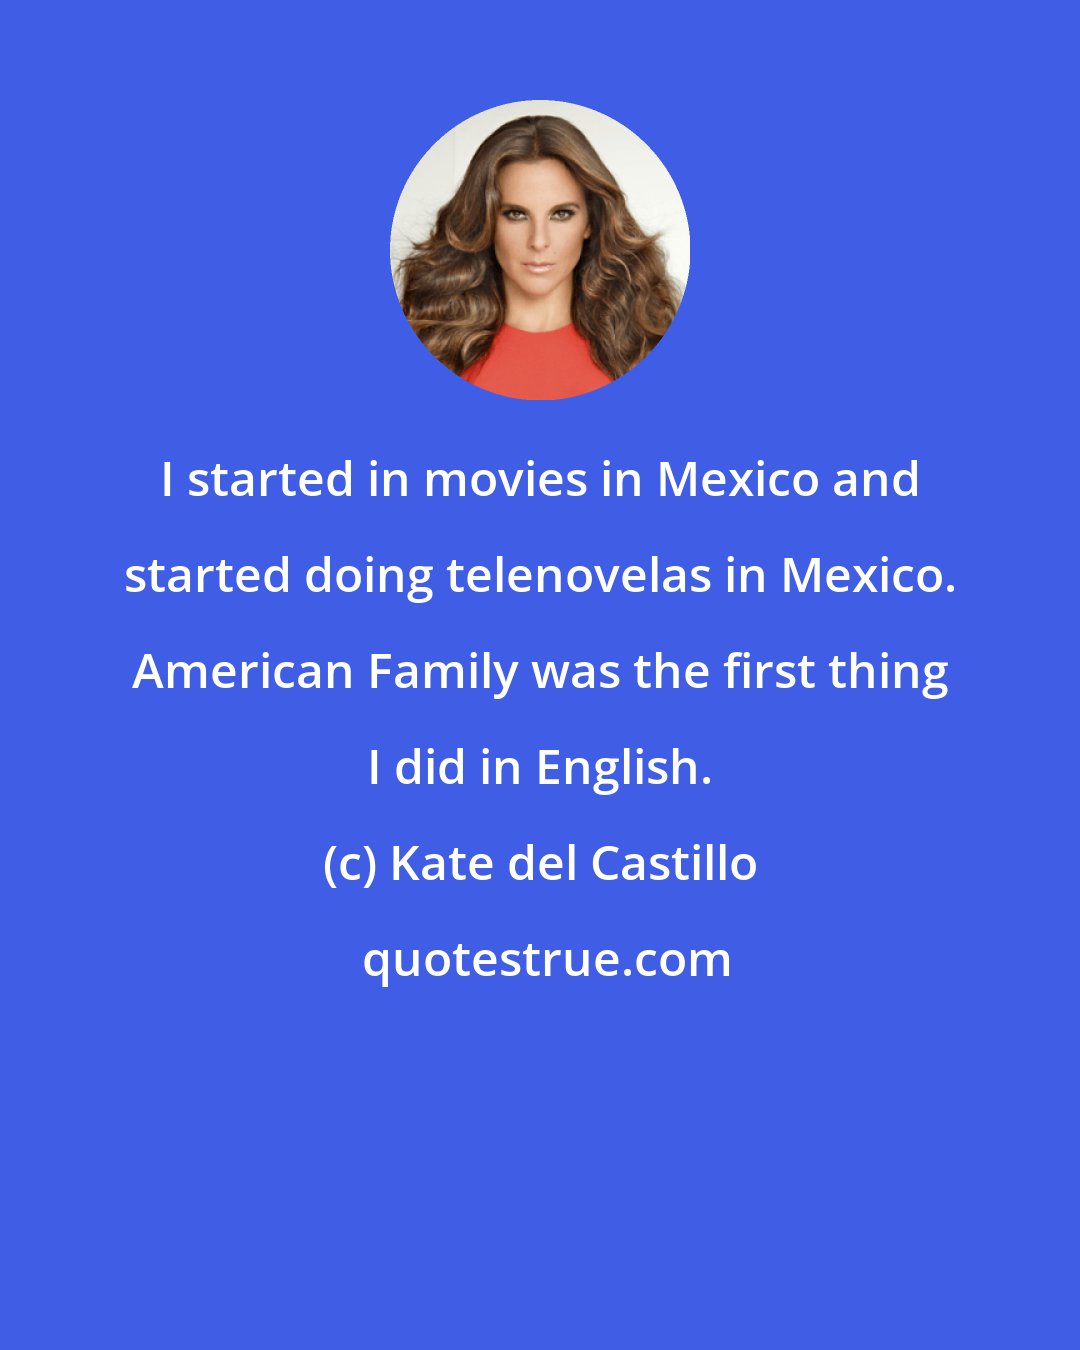 Kate del Castillo: I started in movies in Mexico and started doing telenovelas in Mexico. American Family was the first thing I did in English.